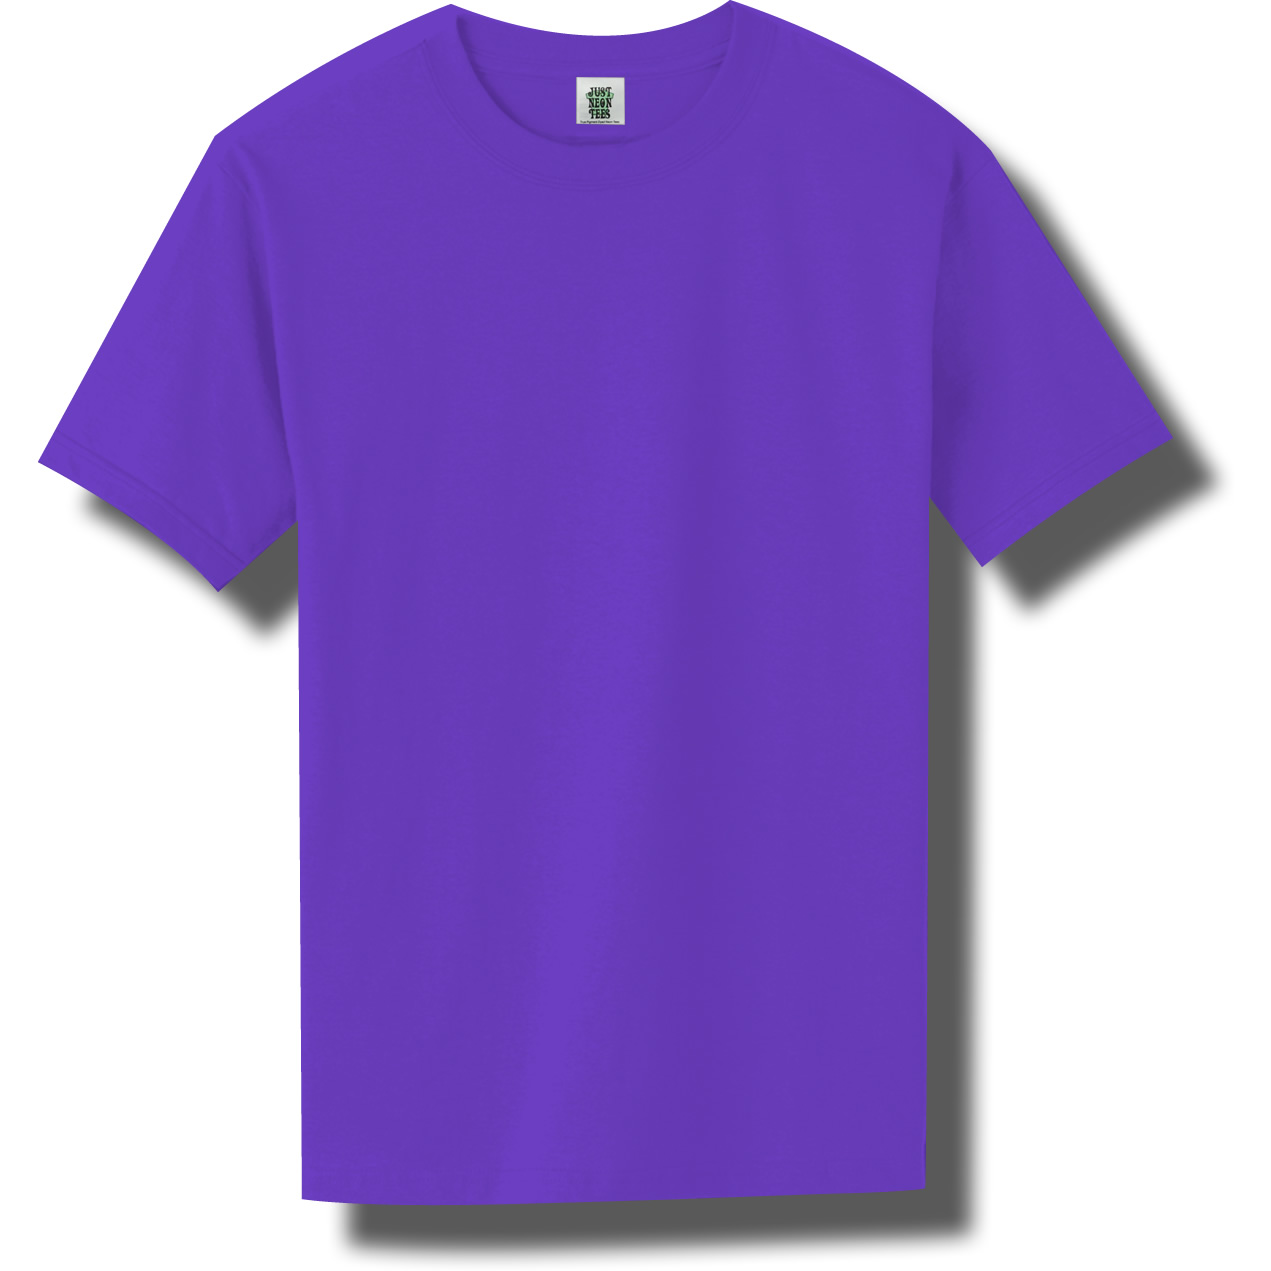 Neon Purple Introduced as an Exciting New Color of T-shirts Offered by ...